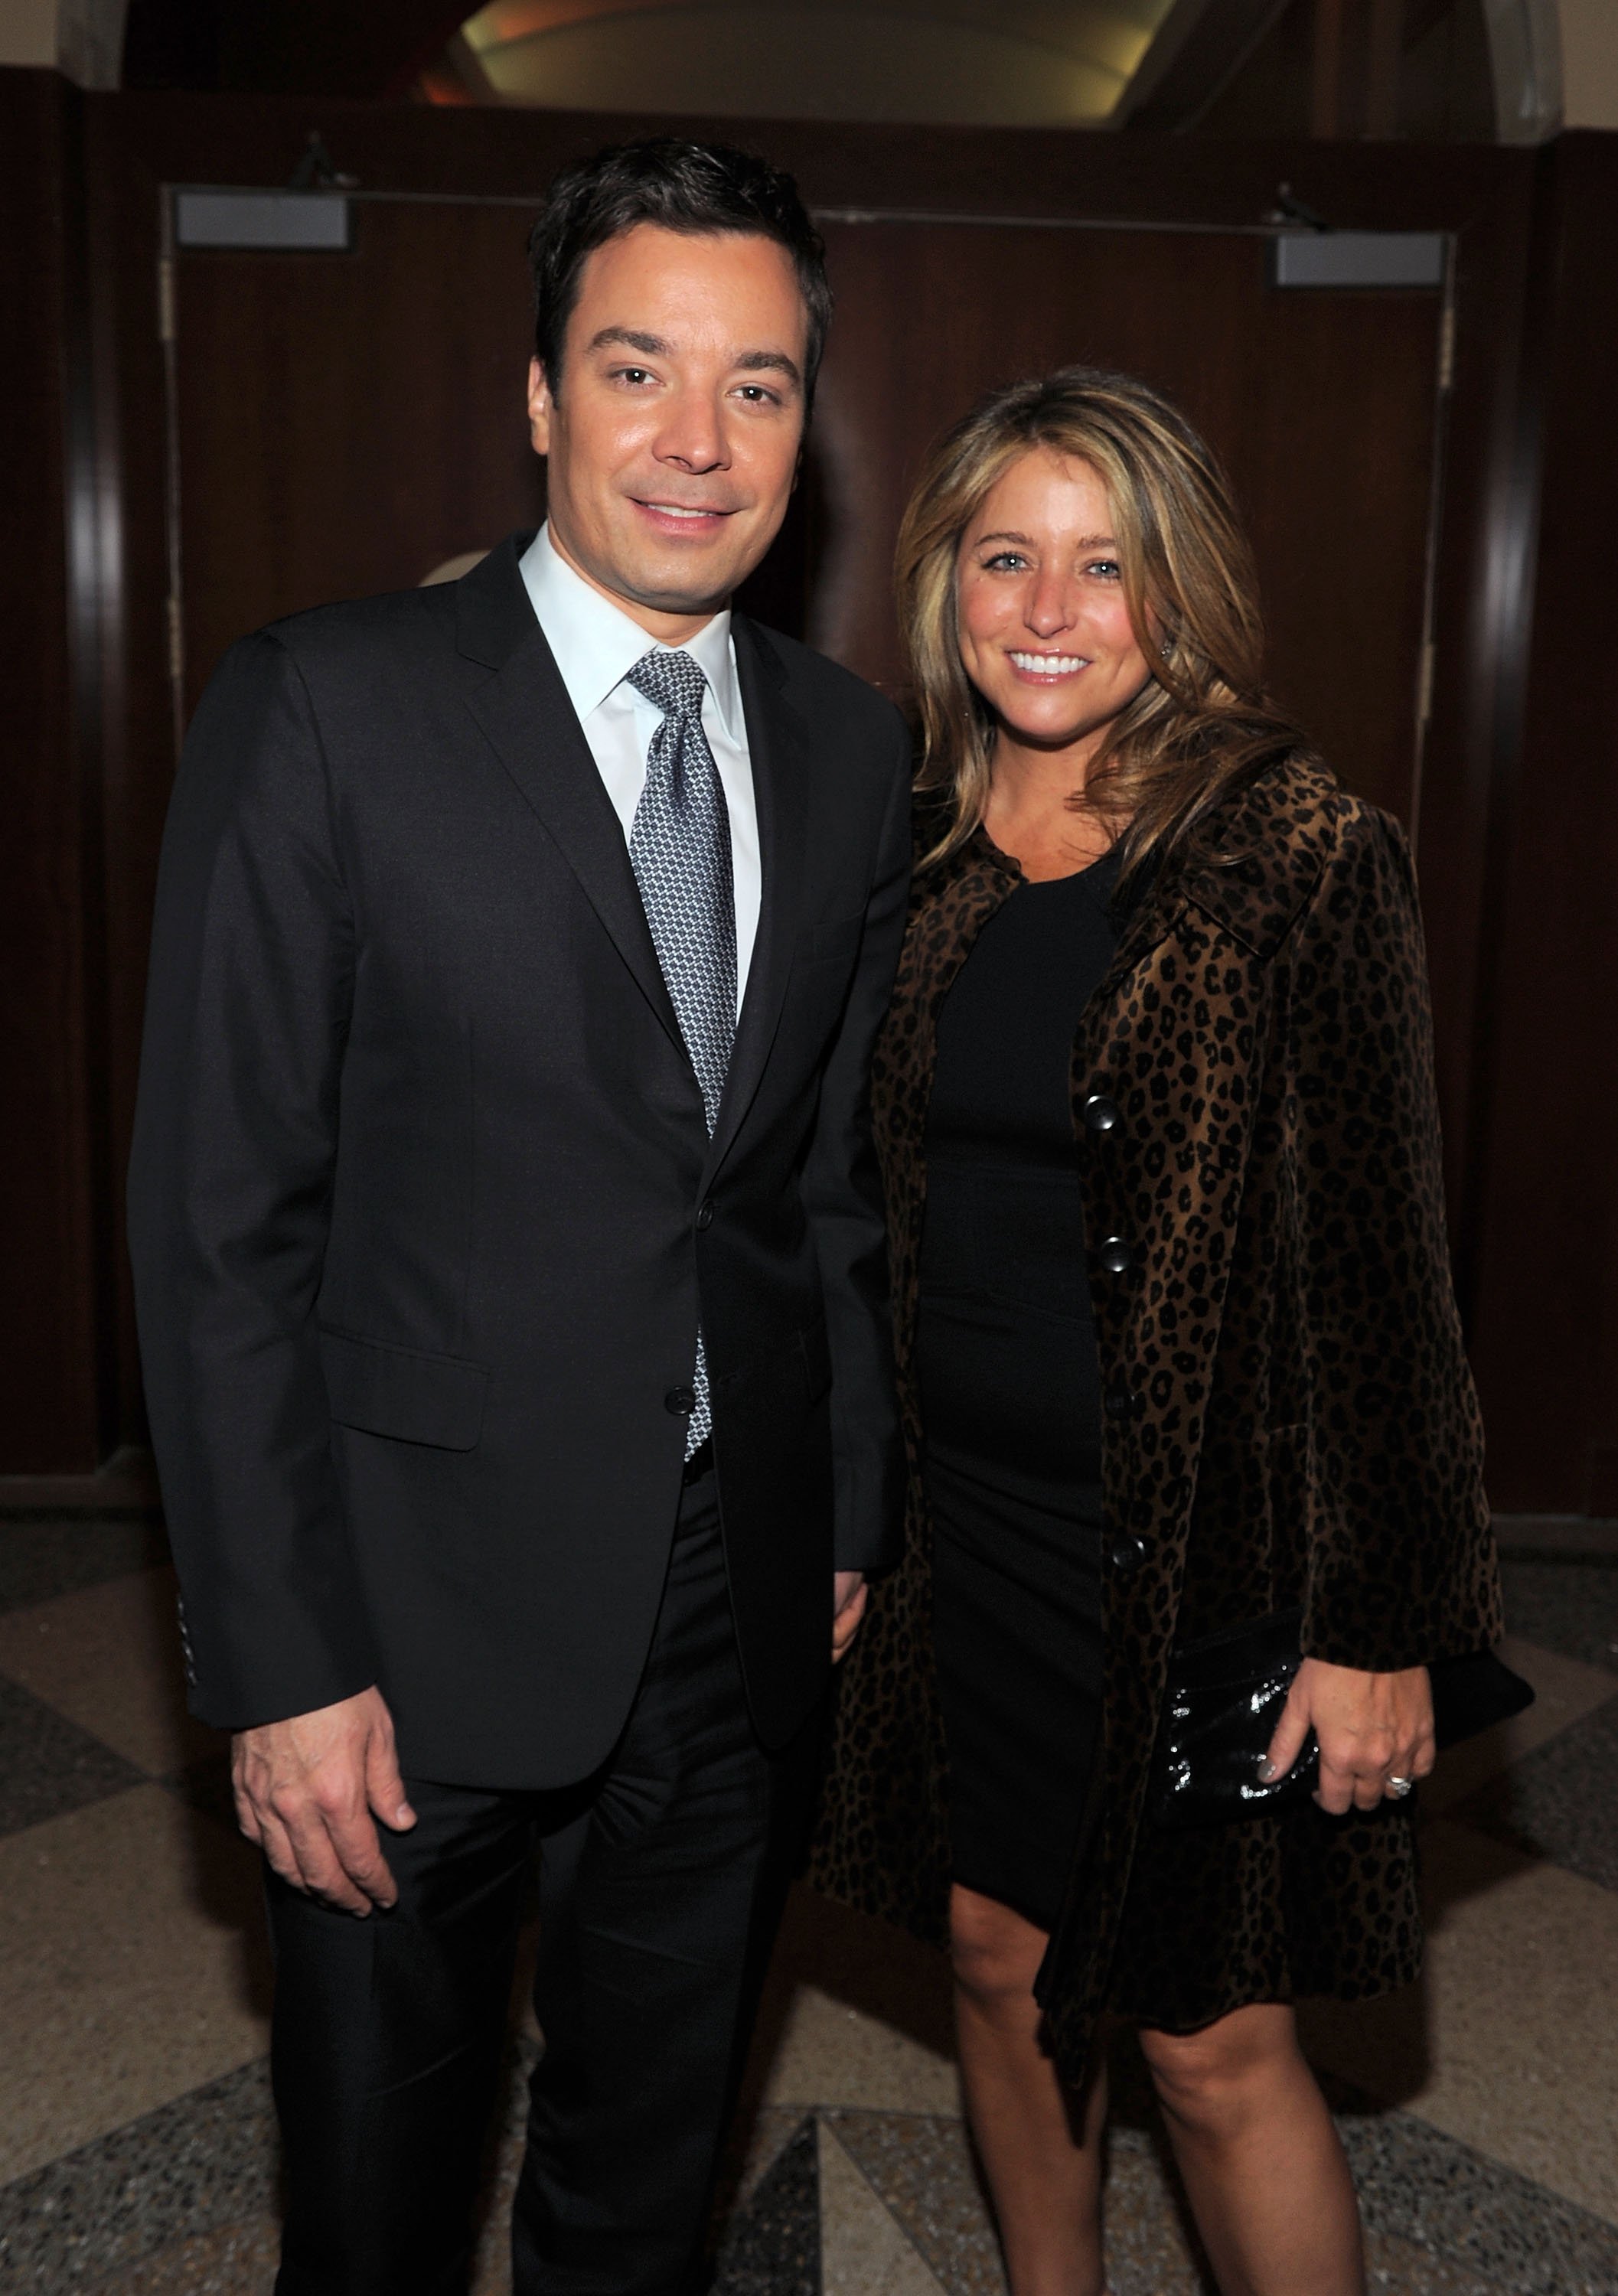 Jimmy Fallon and Nancy Juvonen attend Food Bank For New York City's Annual Can-Do Awards Gala on April 7, 2011, in New York City. | Source: Getty Images.